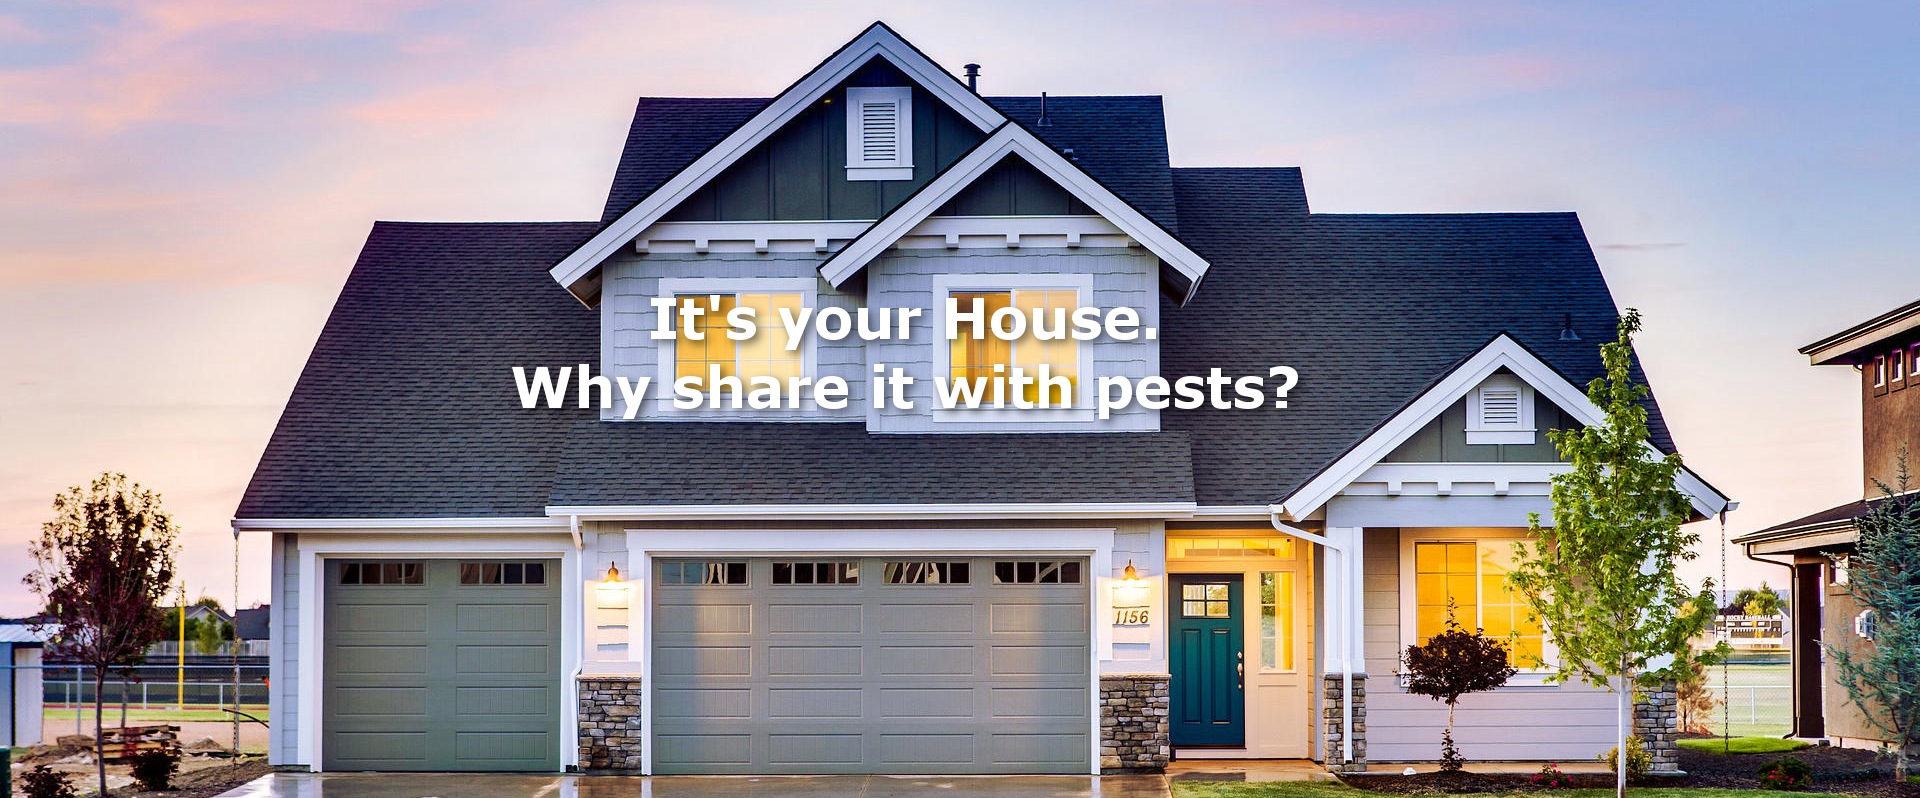 It's your house... Why share it with pests?